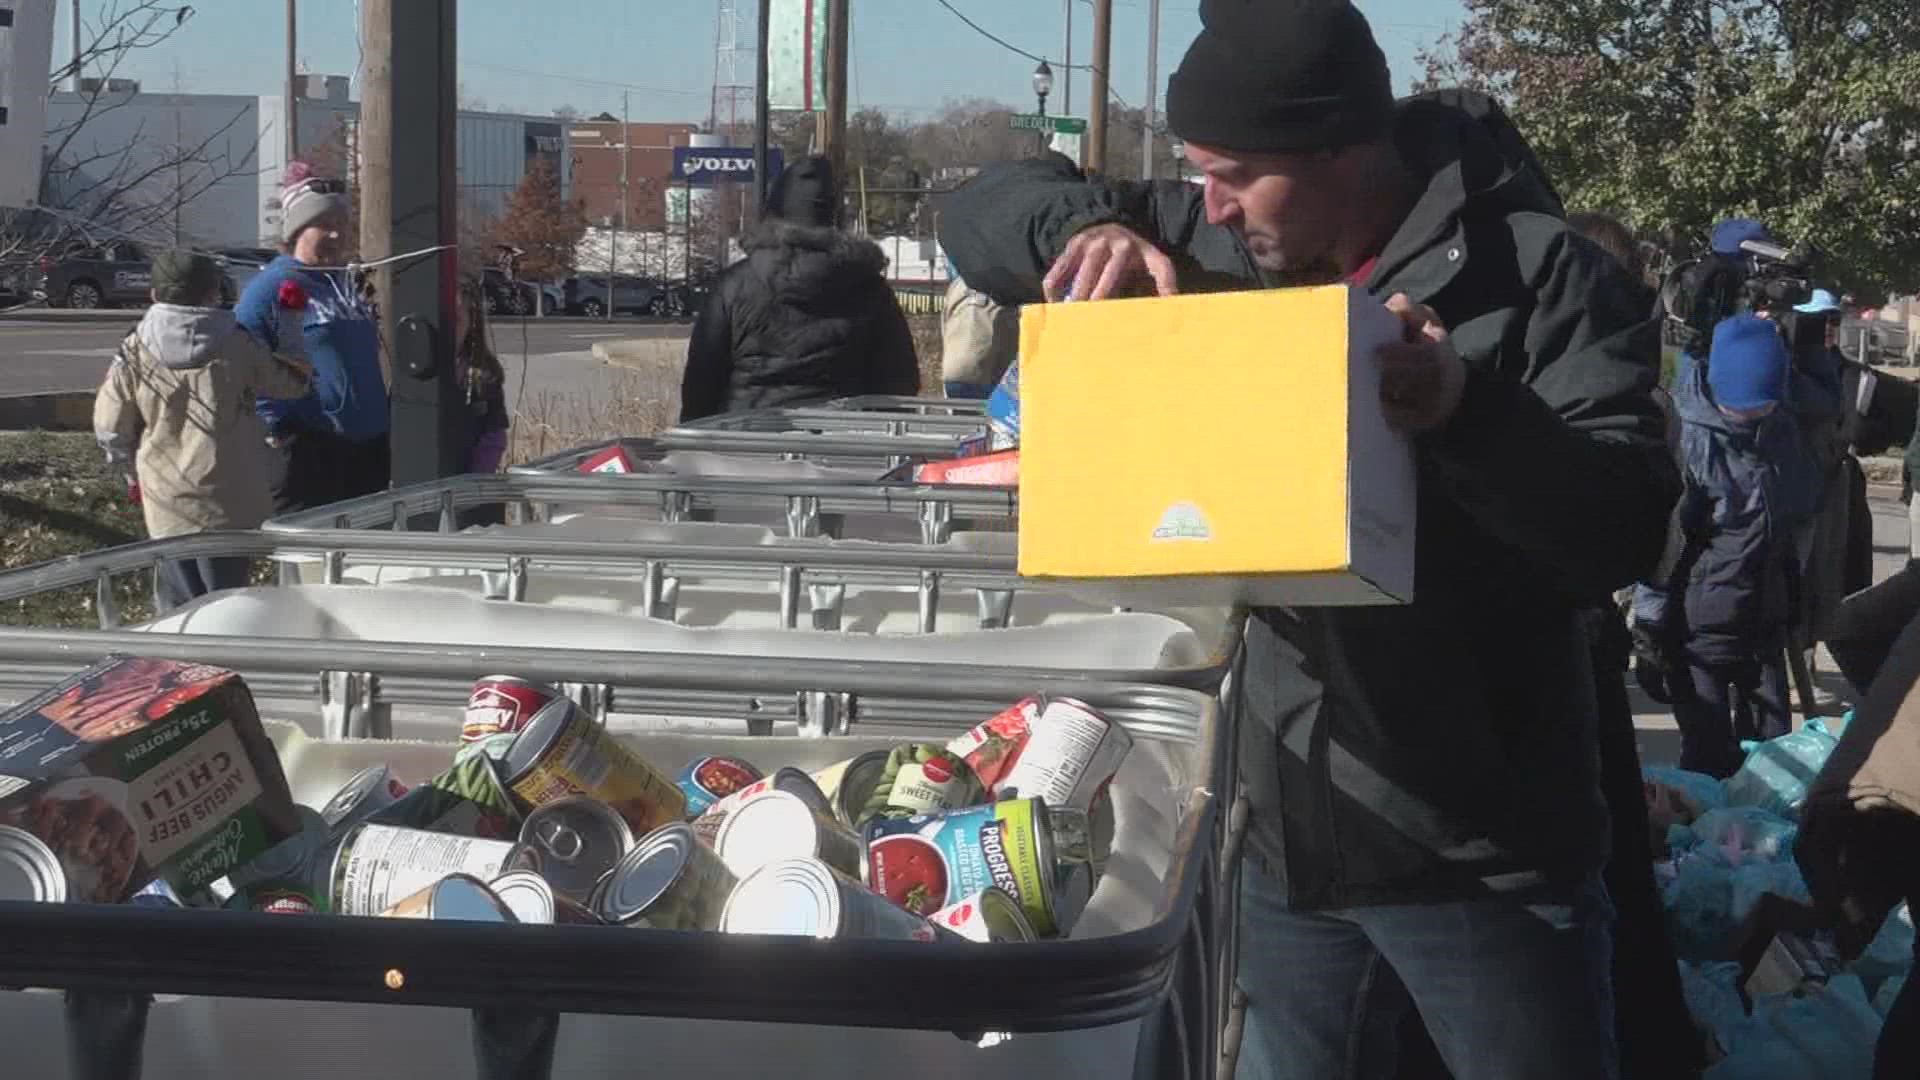 Scouting for Food took place Saturday in St. Louis. Scouts helped collect food items for food banks.